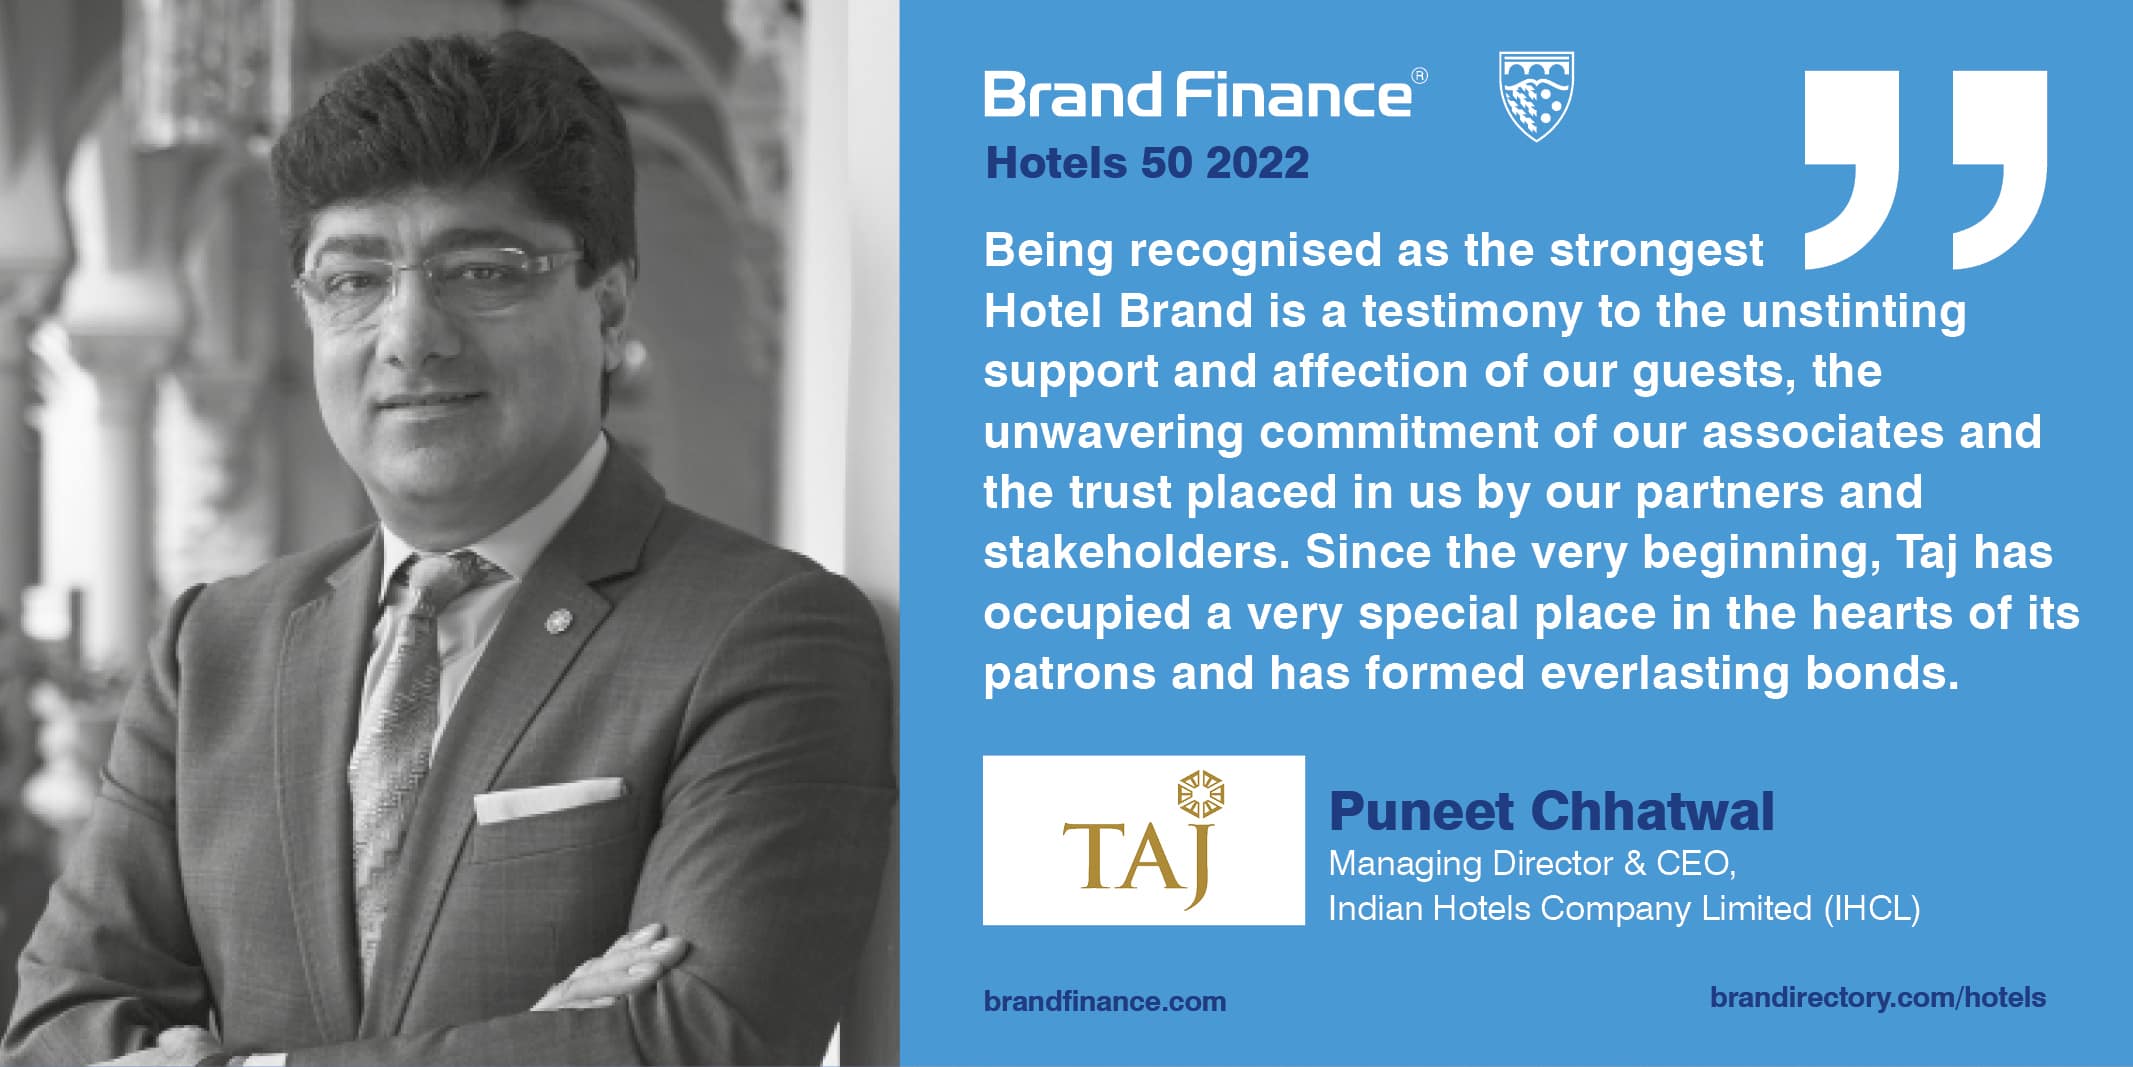 Puneet Chhatwal, Managing Director & CEO, Indian Hotels Company Limited (IHCL)